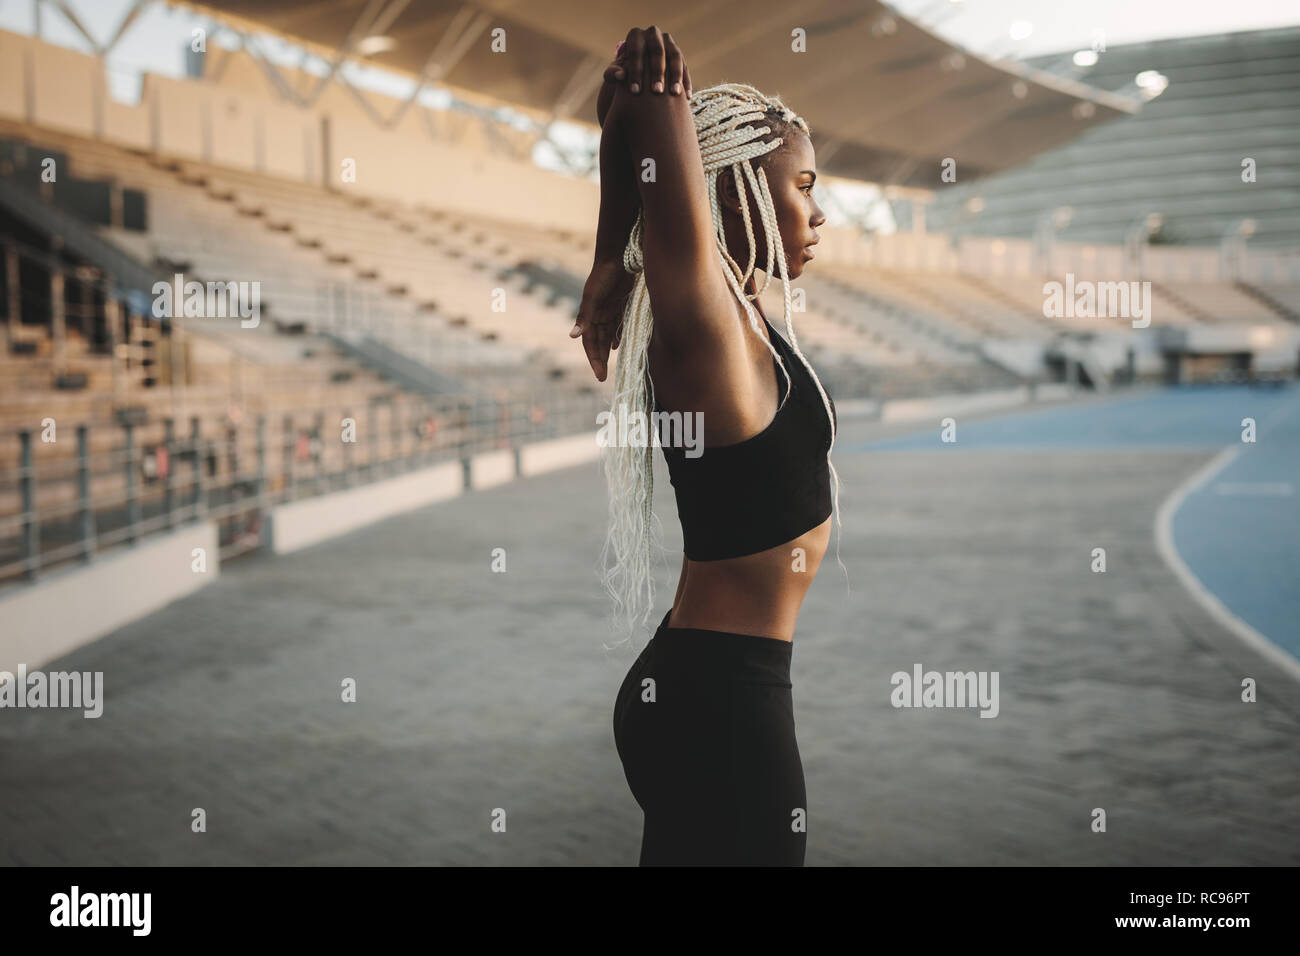 Woman athlete doing exercise in a track and field stadium. Runner warming up stretching hands and shoulders before running. Stock Photo